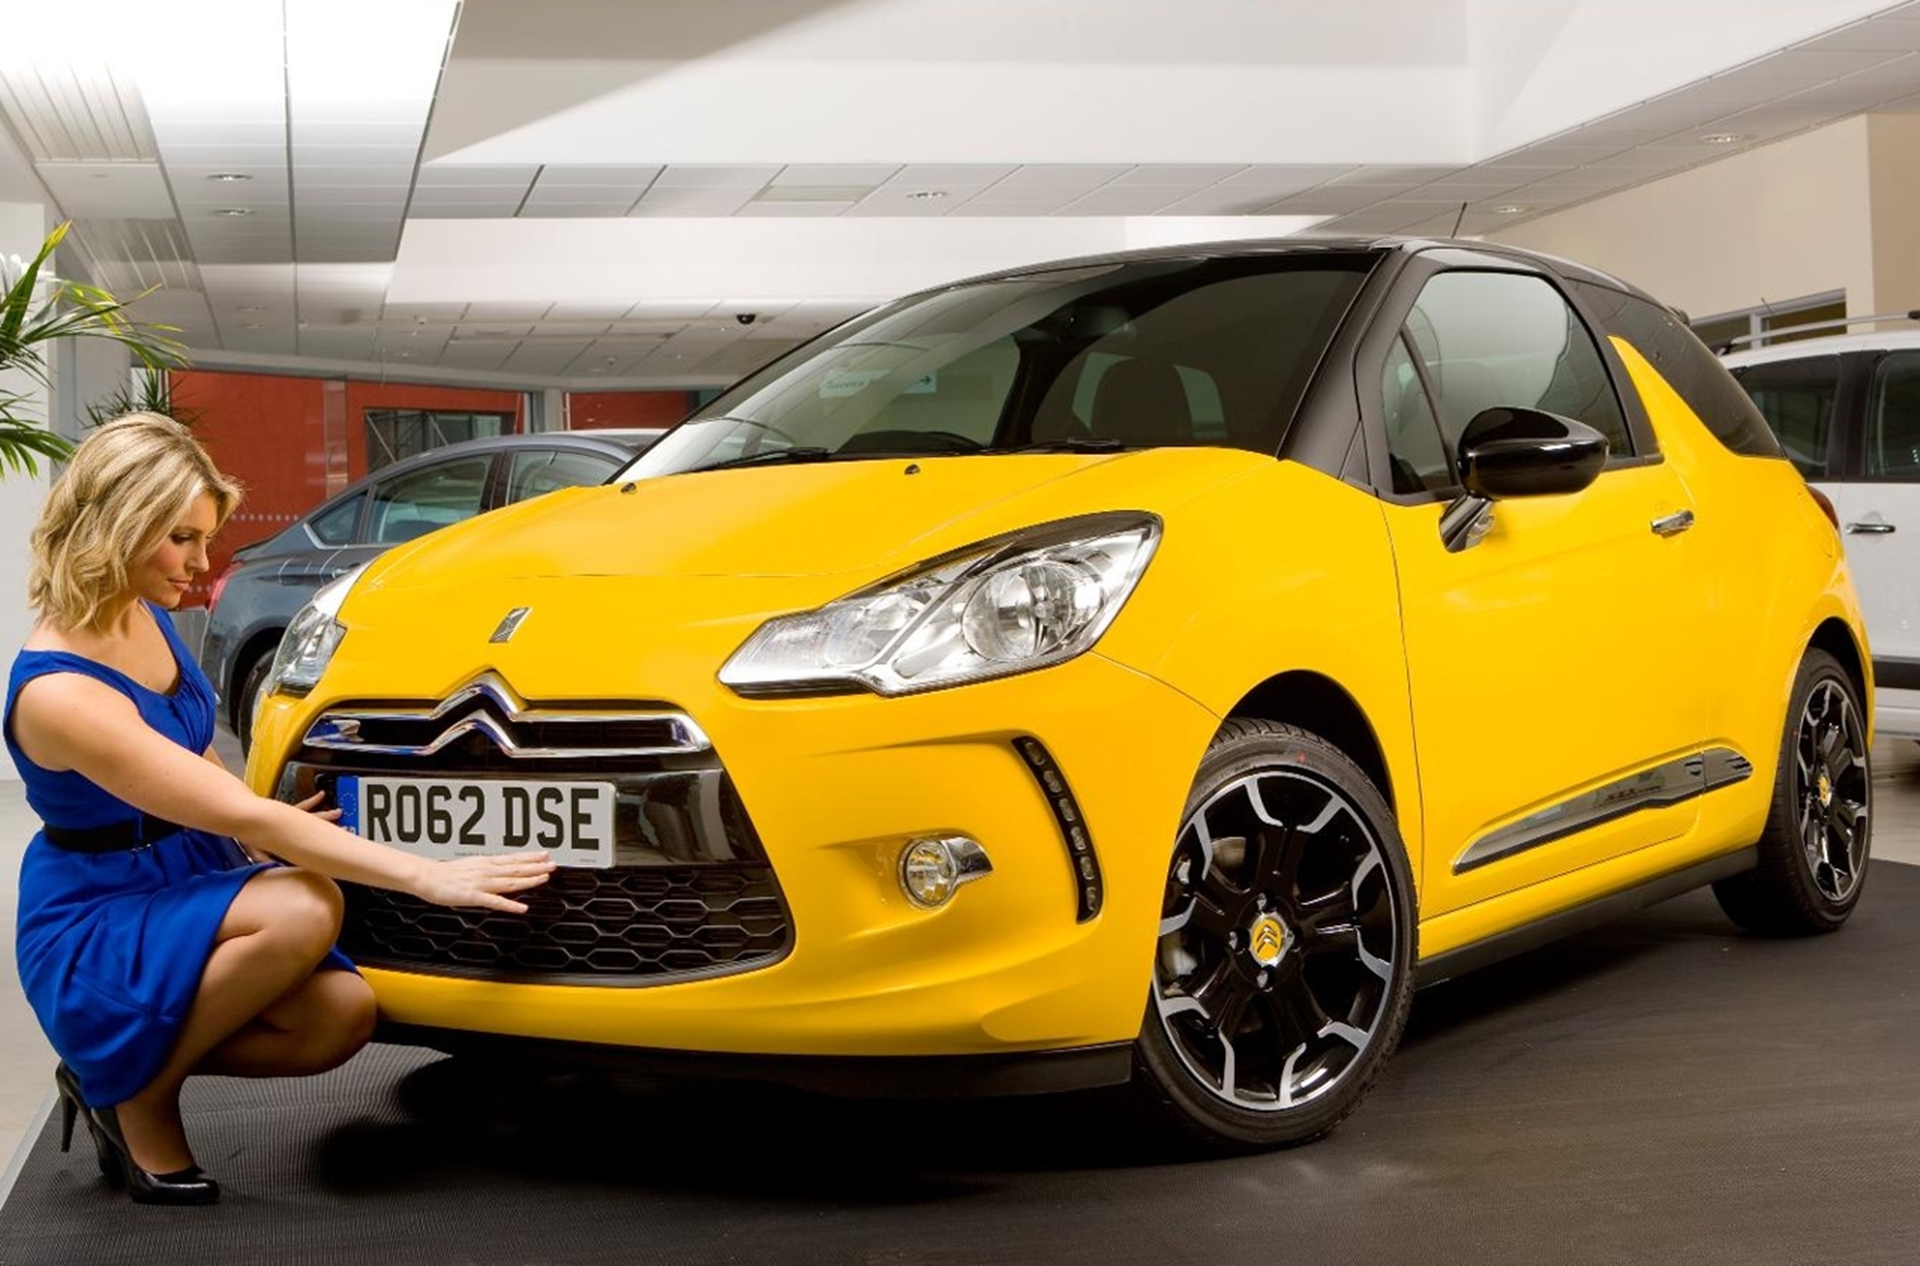 CITROËN CONFIRMS RANGE OF COMPETITIVE SEPTEMBER OFFERS AS DS3 SALES SUCCESS CONTINUES